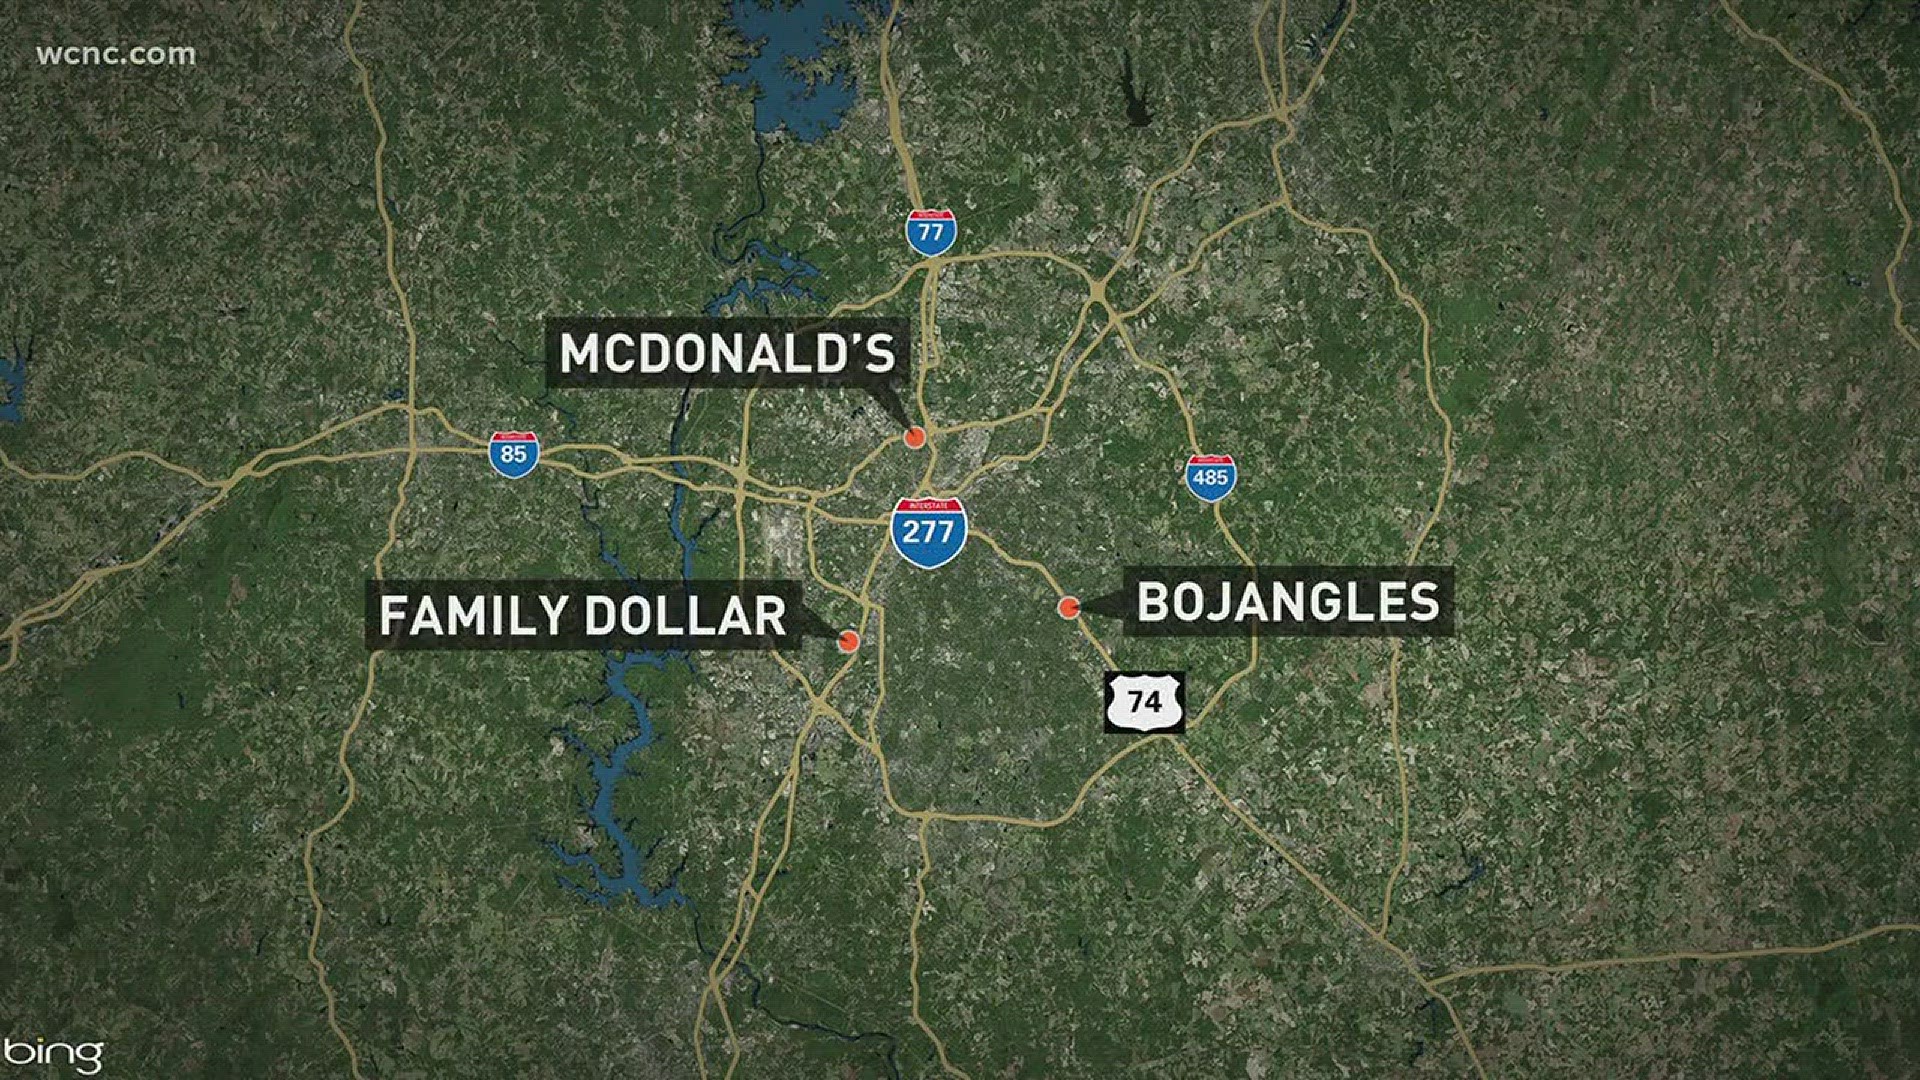 Police are investigating robberies at McDonald's, a Family Dollar and a Bojangles where shots were fired Monday night.